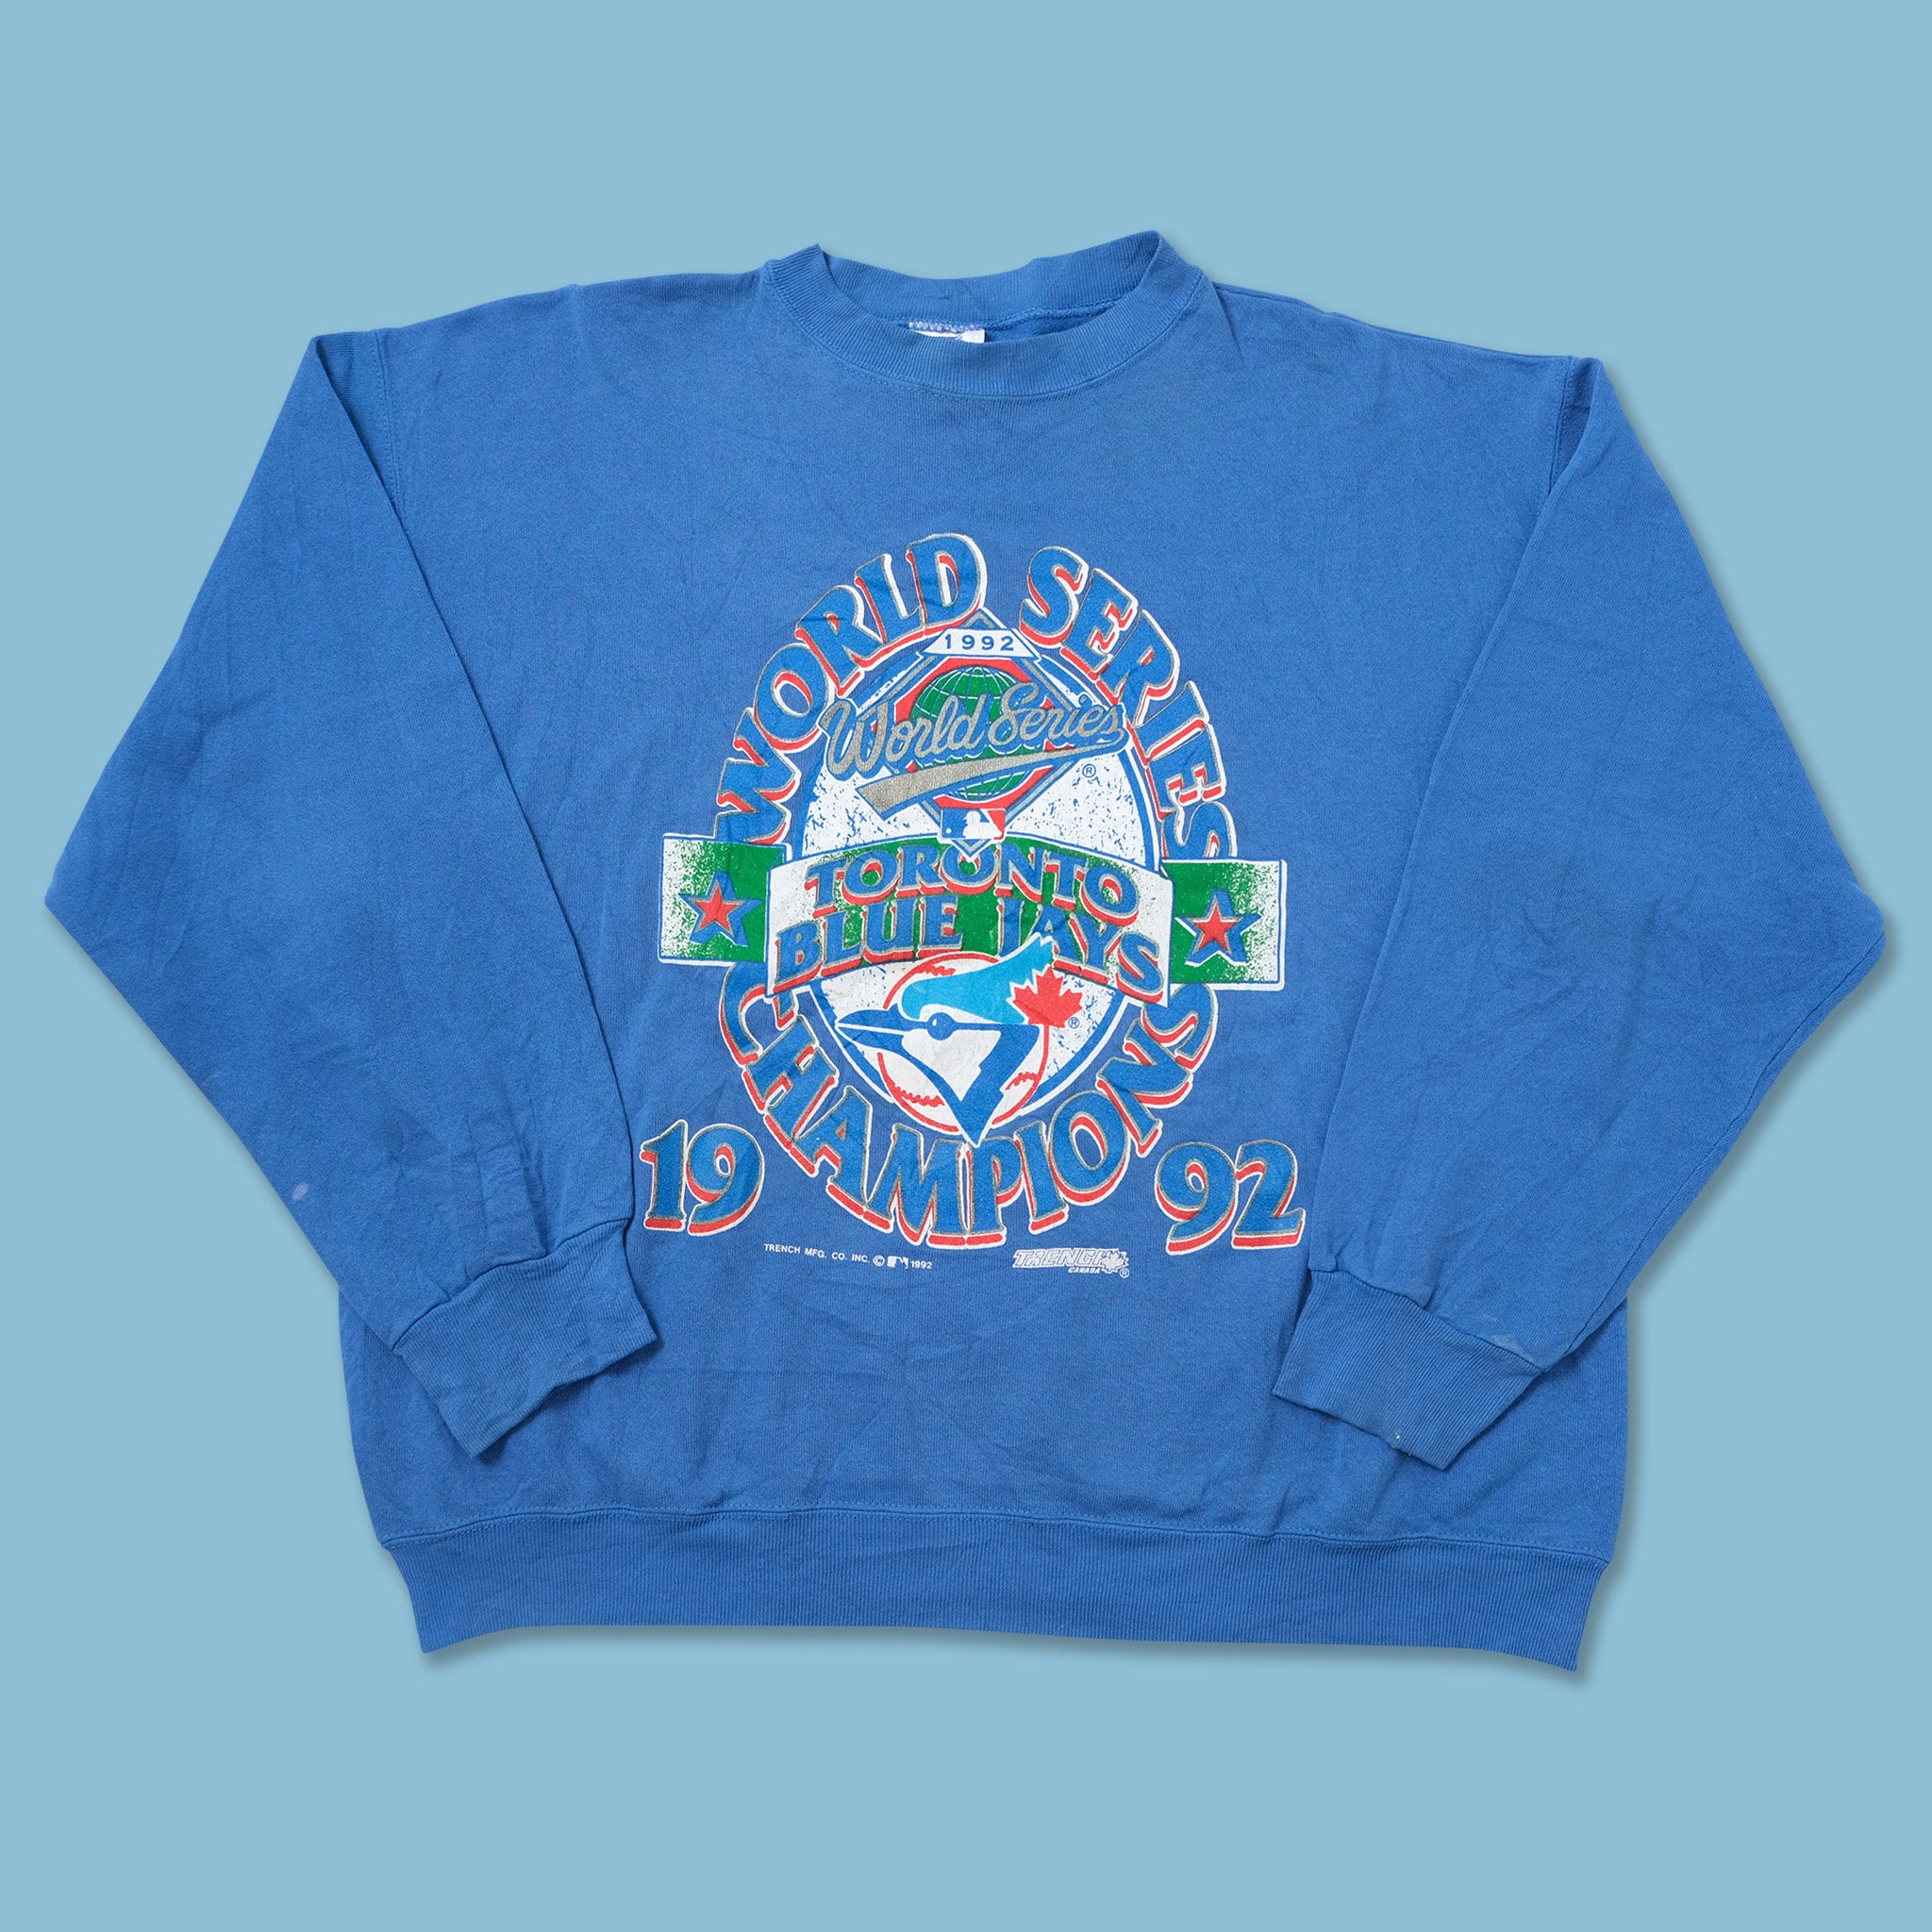 Yes I'm old but i saw Toronto Blue Jays back 2 back 1992-1993 world series  champions shirt, hoodie, sweater, long sleeve and tank top